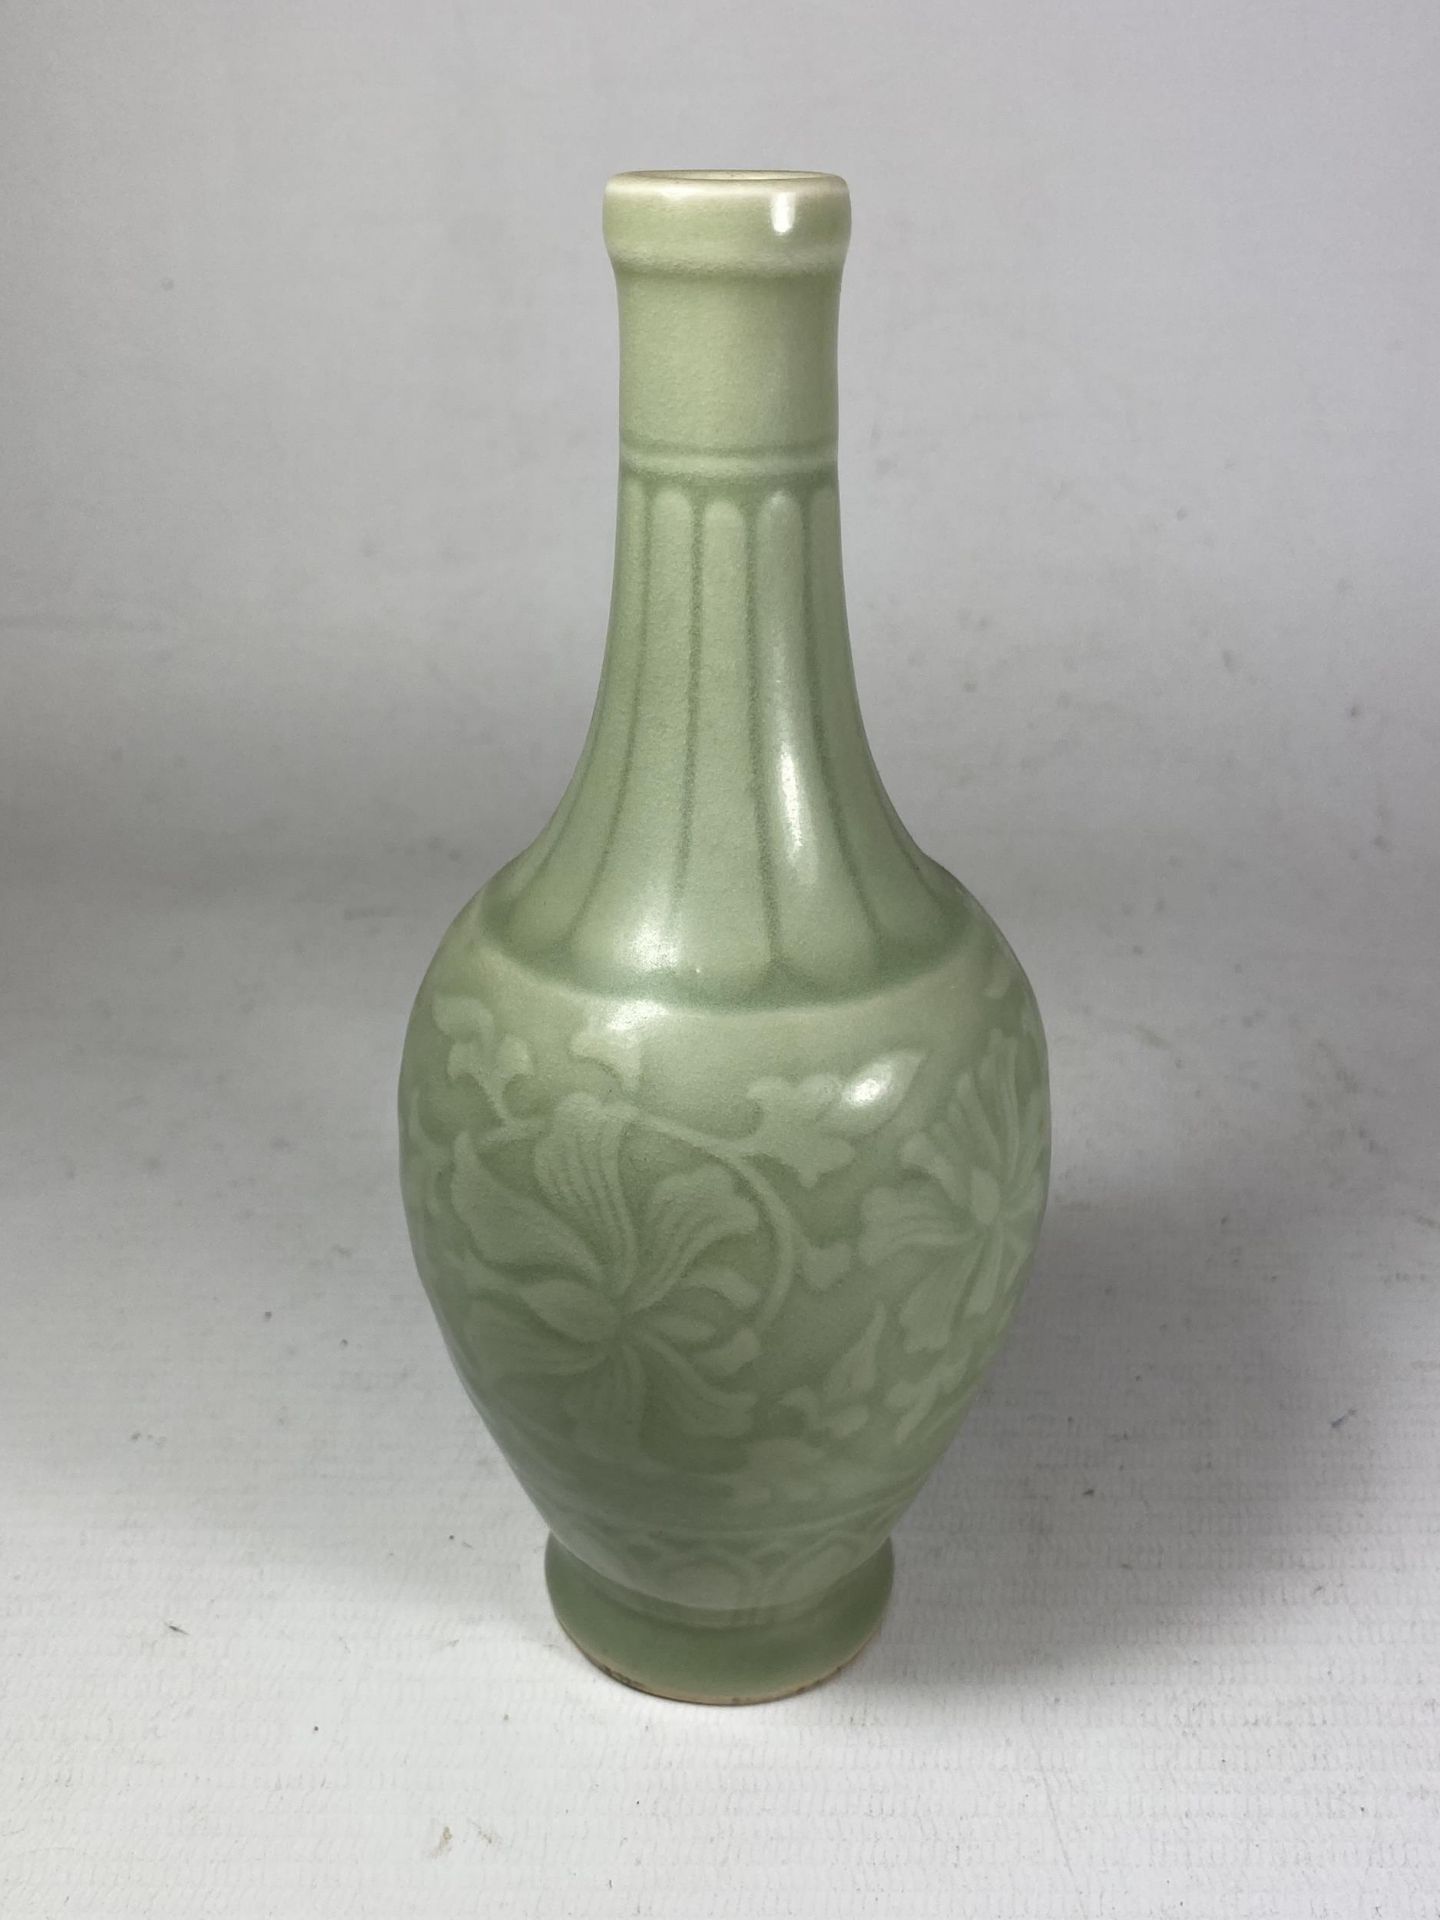 A CHINESE CELADON PORCELAIN FLORAL VASE, UNMARKED TO BASE, HEIGHT 18CM